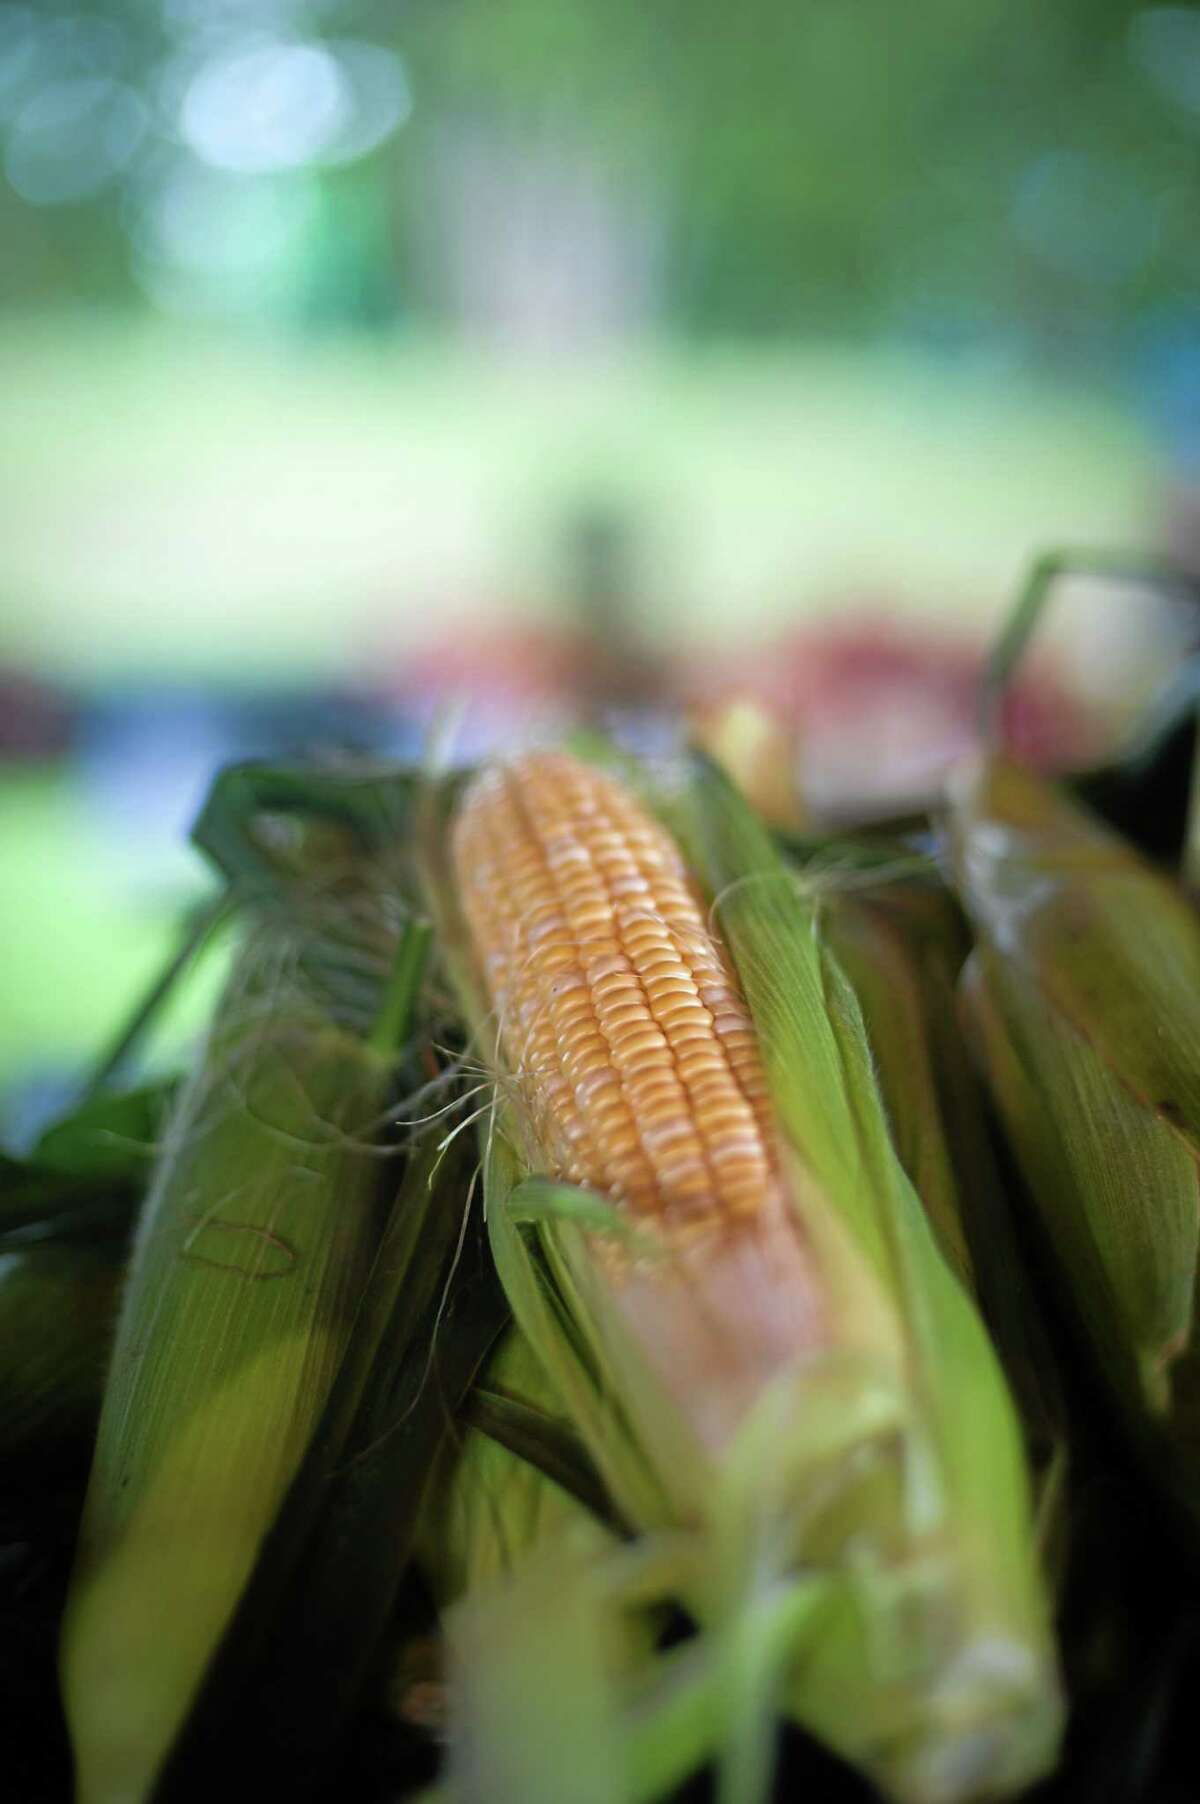 Sweet corn comes but once a year, so be sure to pick up a dozen or two ears for the dinner table while it is available. From farmer's markets to roadside stands, sweet corn is currently in season as a local harvest.